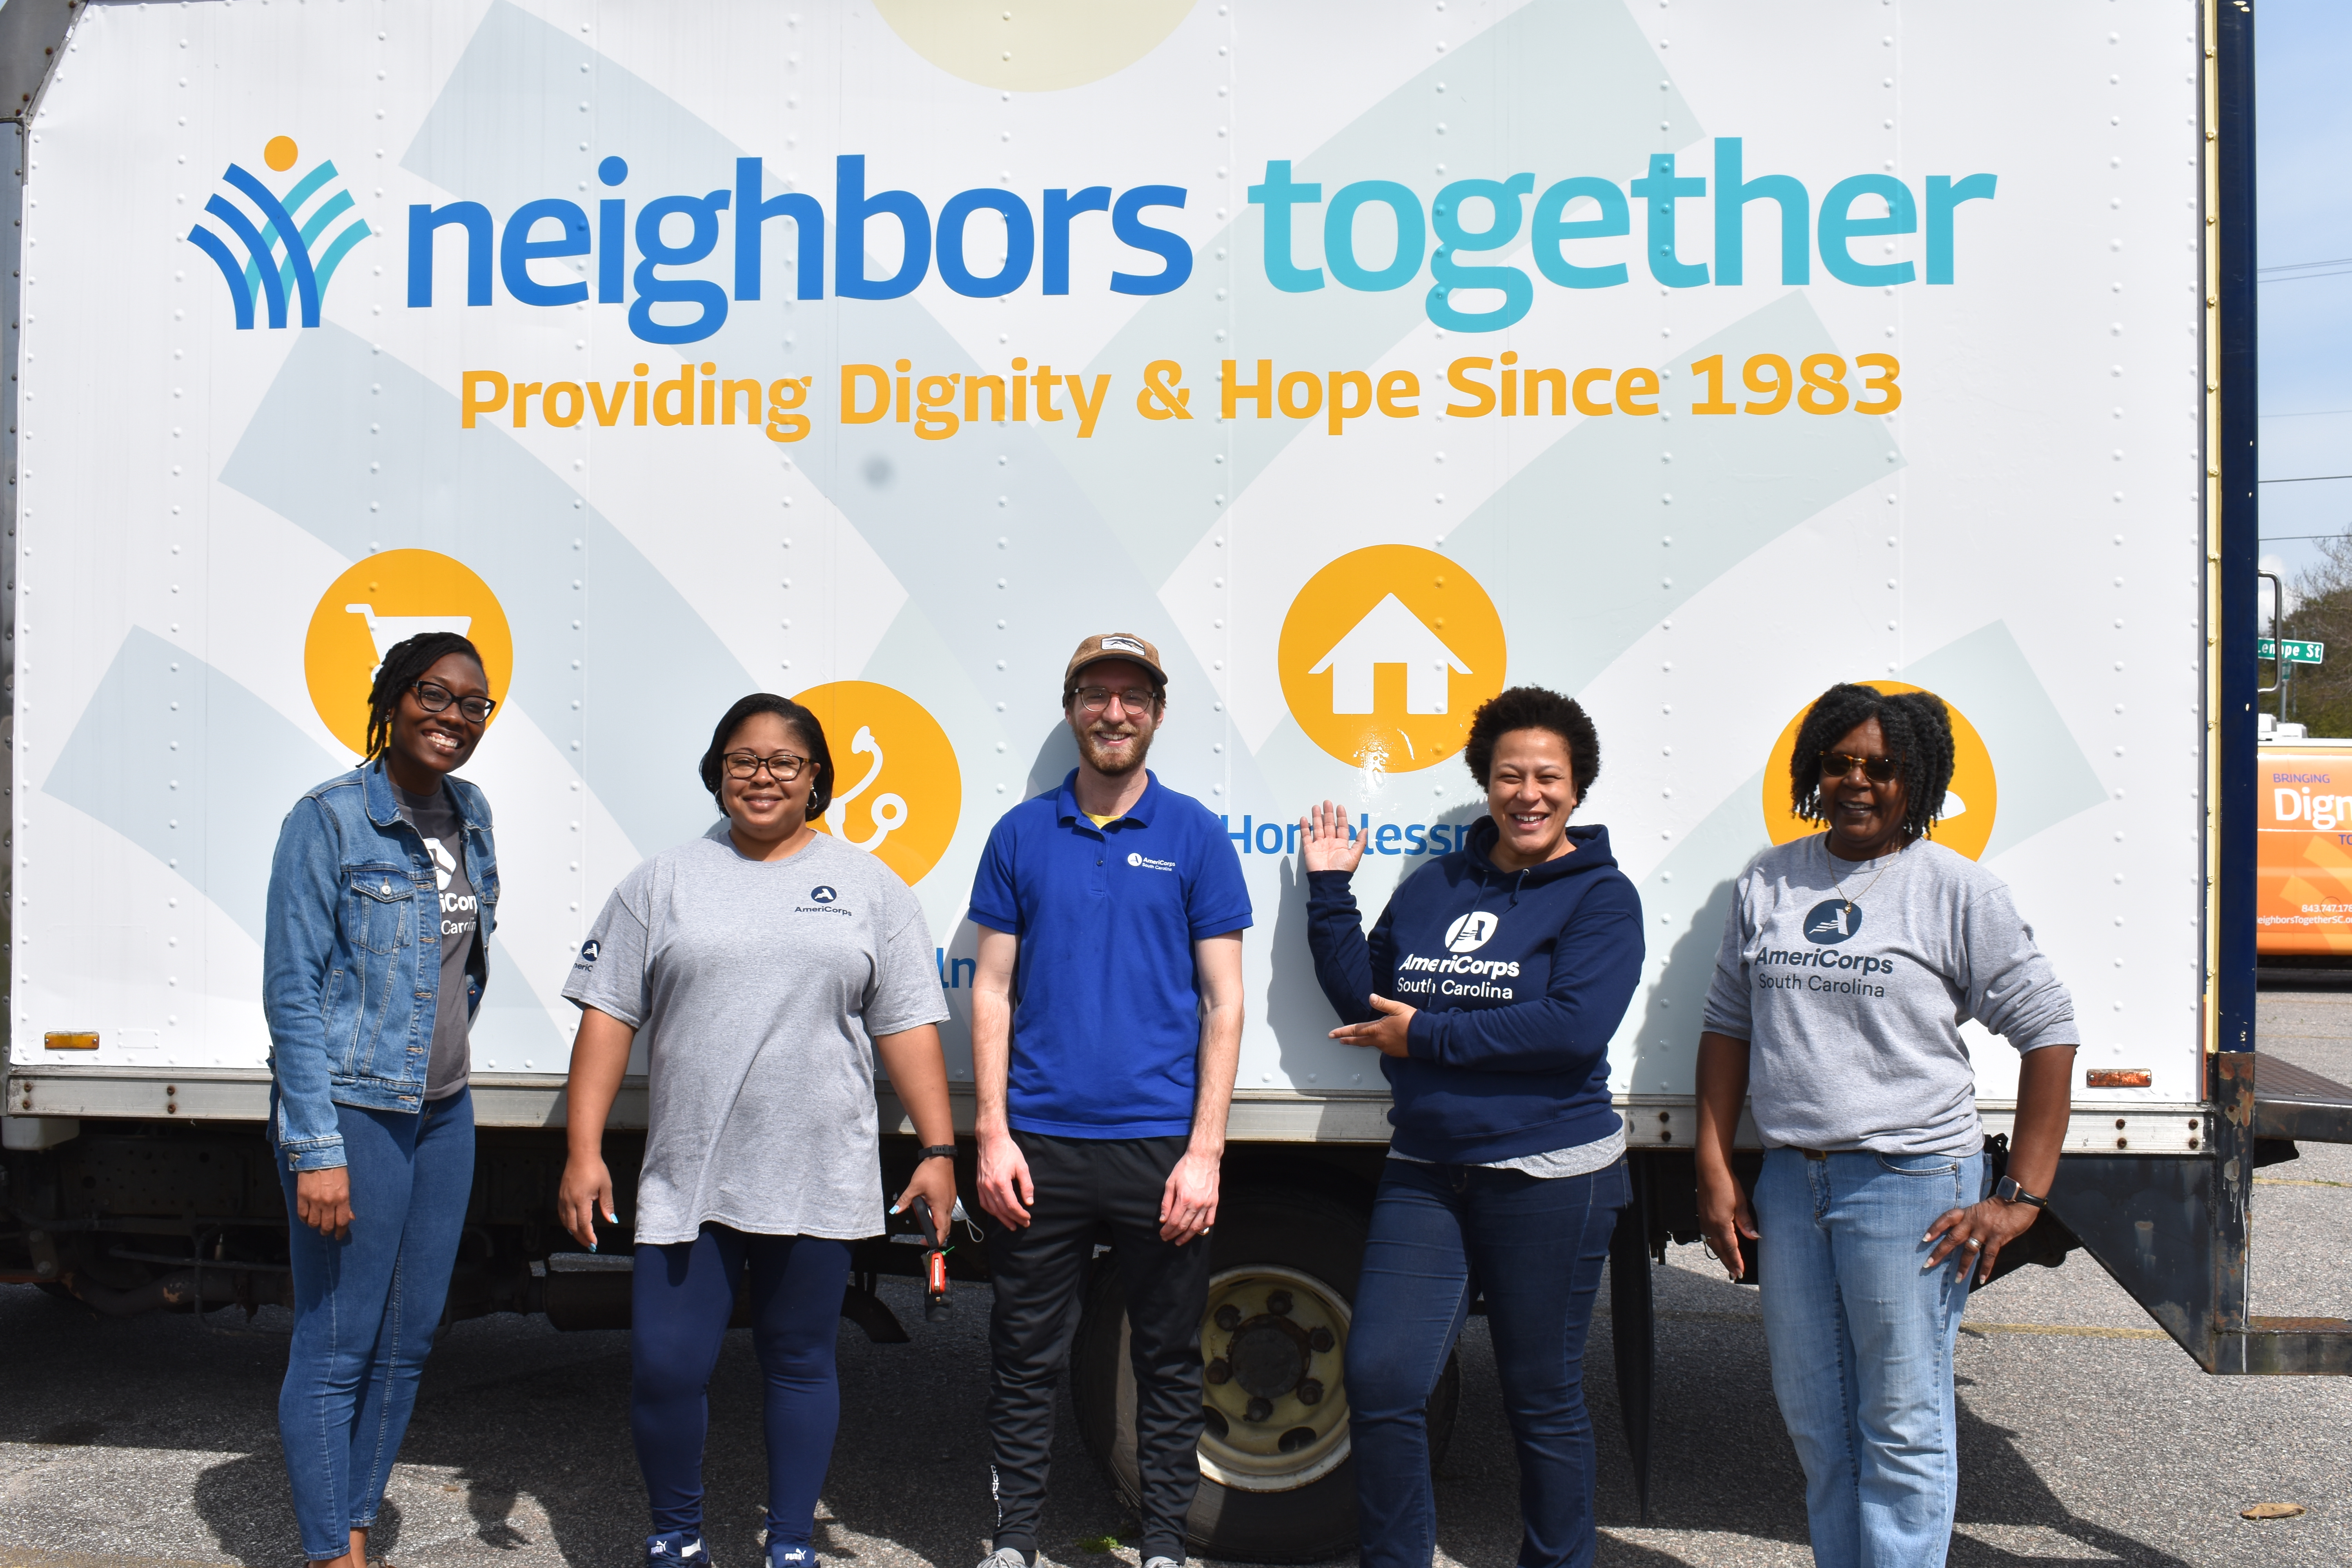 Five AmeriCorps members posing for photo in front of truck that has "Neighbors Together" written on it